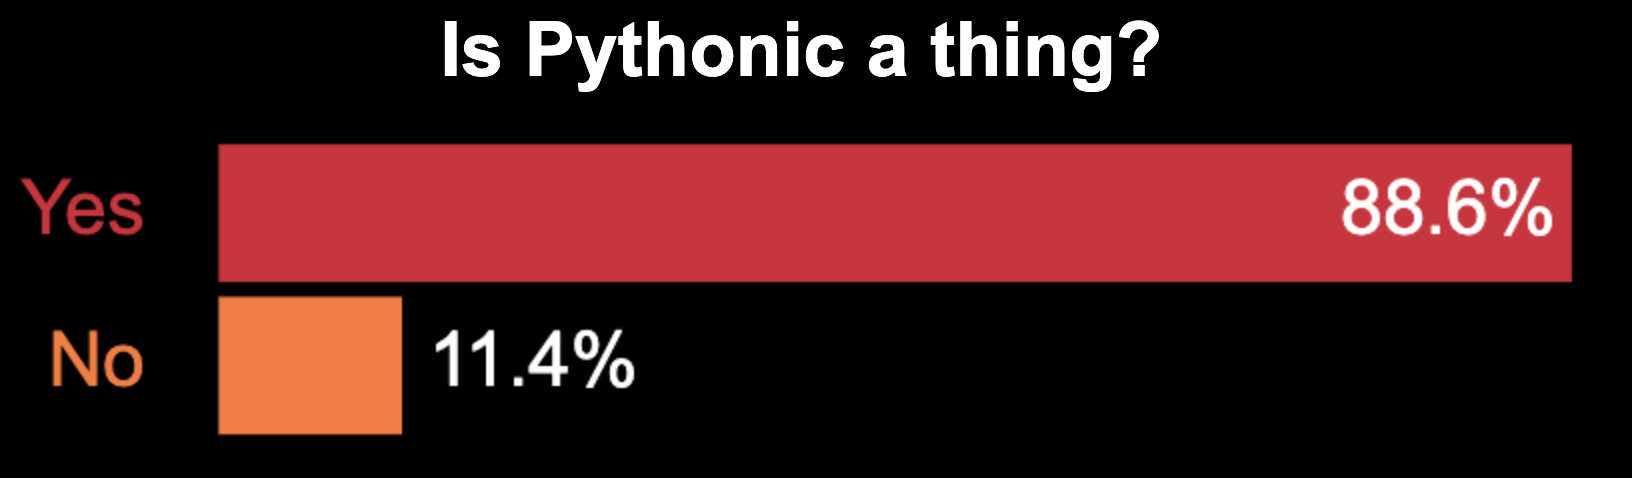 Poll of Is Pythonic a Thing